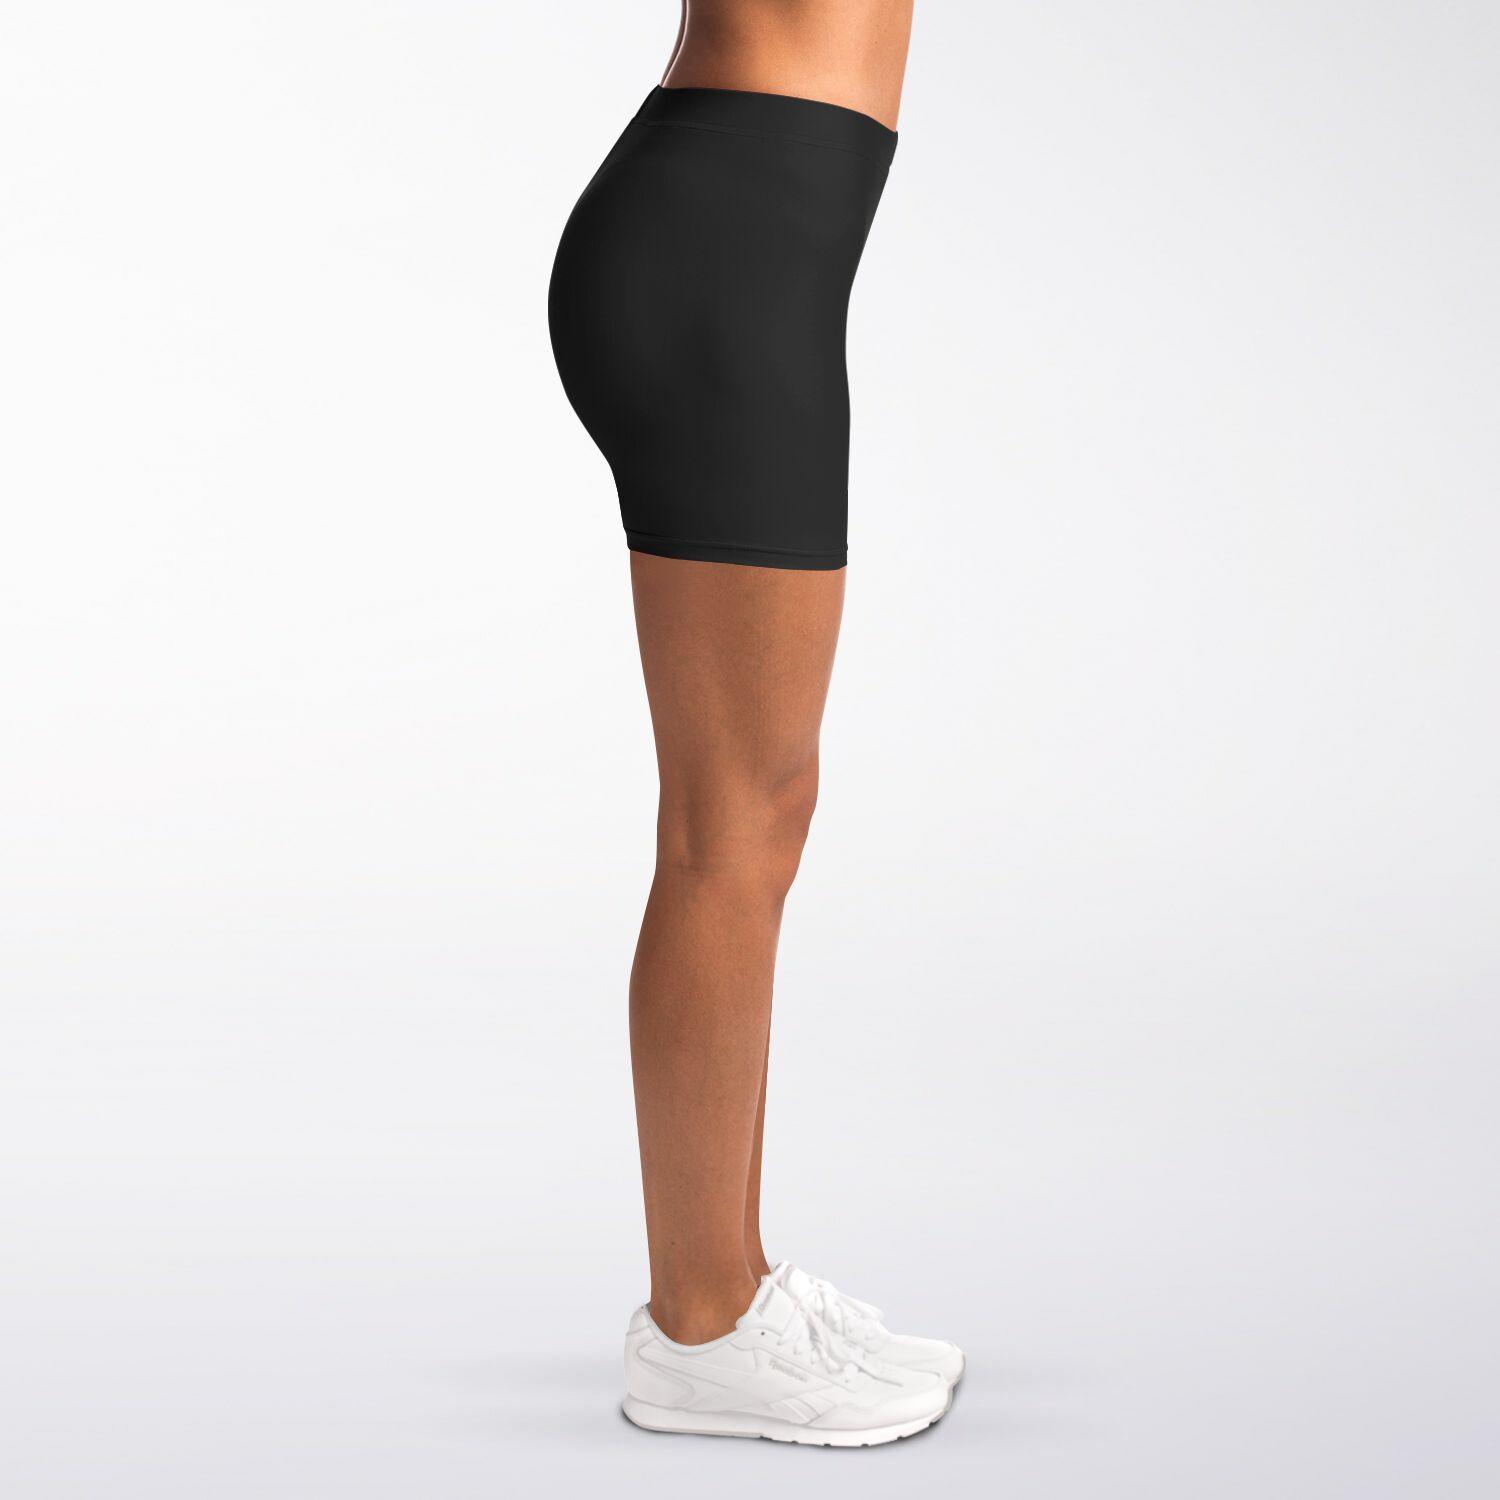 lightweight and comfortable yoga shorts for women - Personal Hour for Yoga and Meditations 